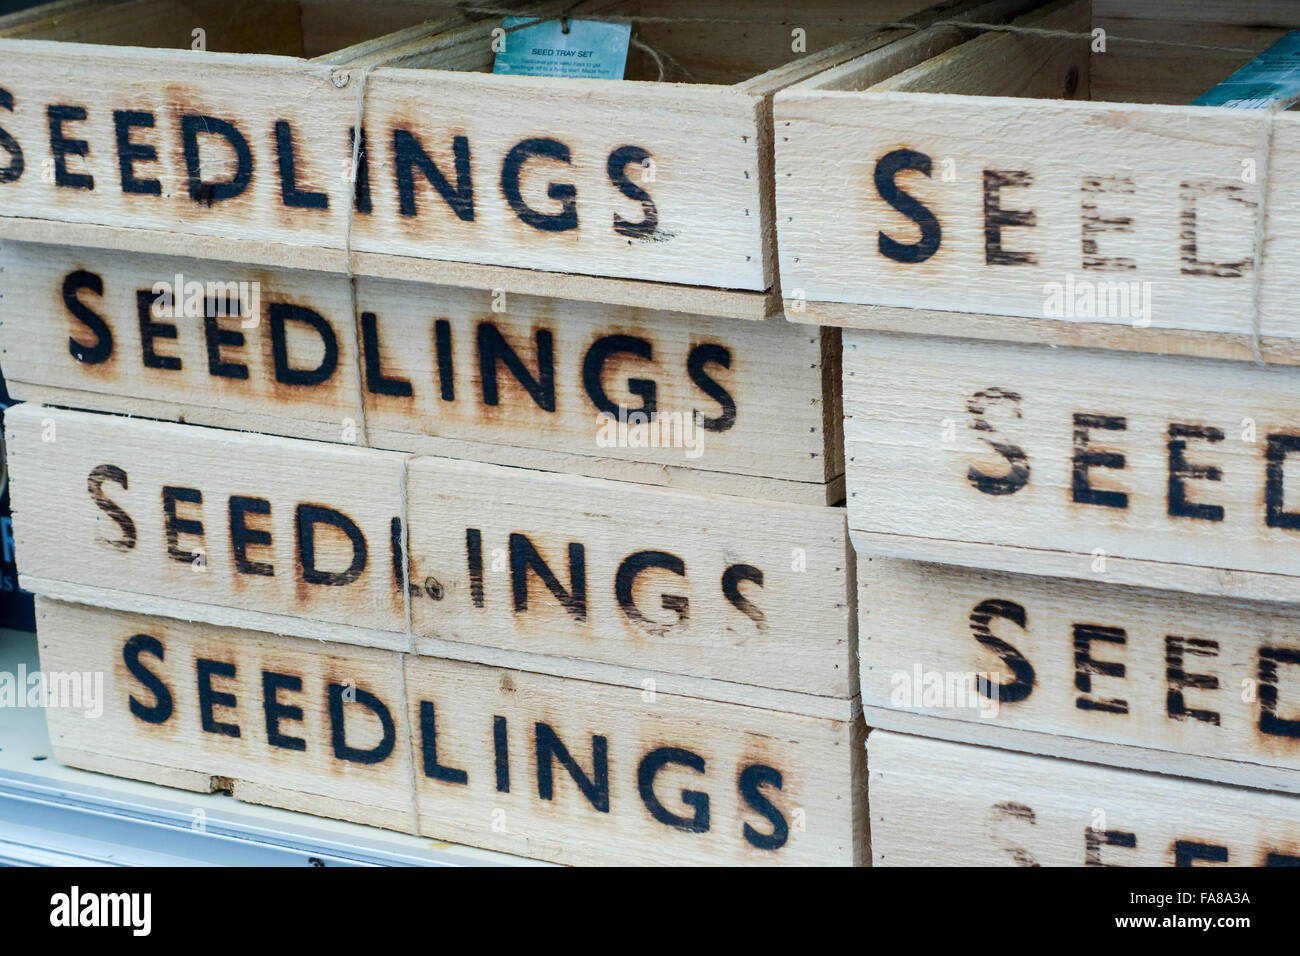 Wooden boxes with the word seedlings stenciled on them Stock Photo